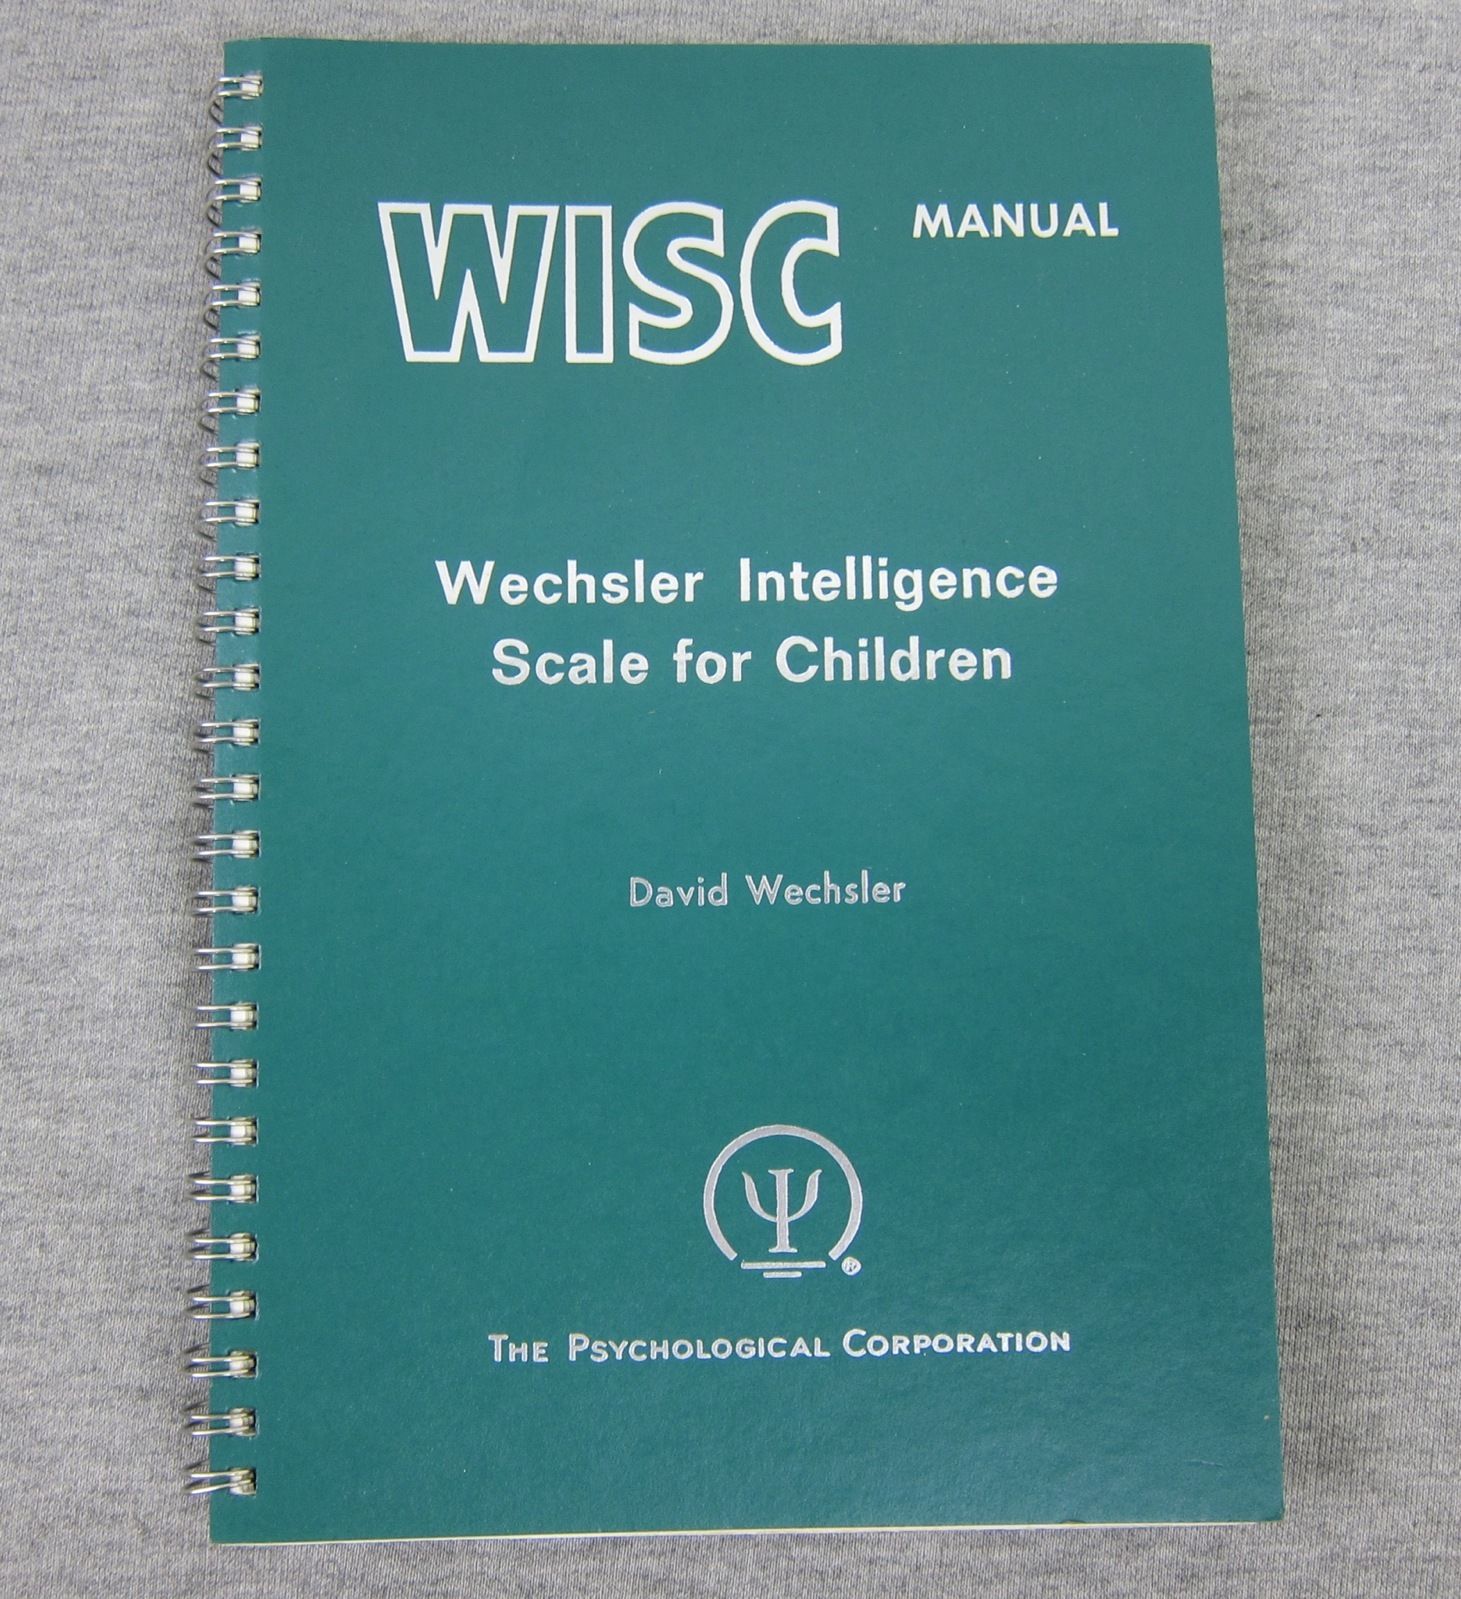 Wechsler Adult Intelligence Scale Manual Download